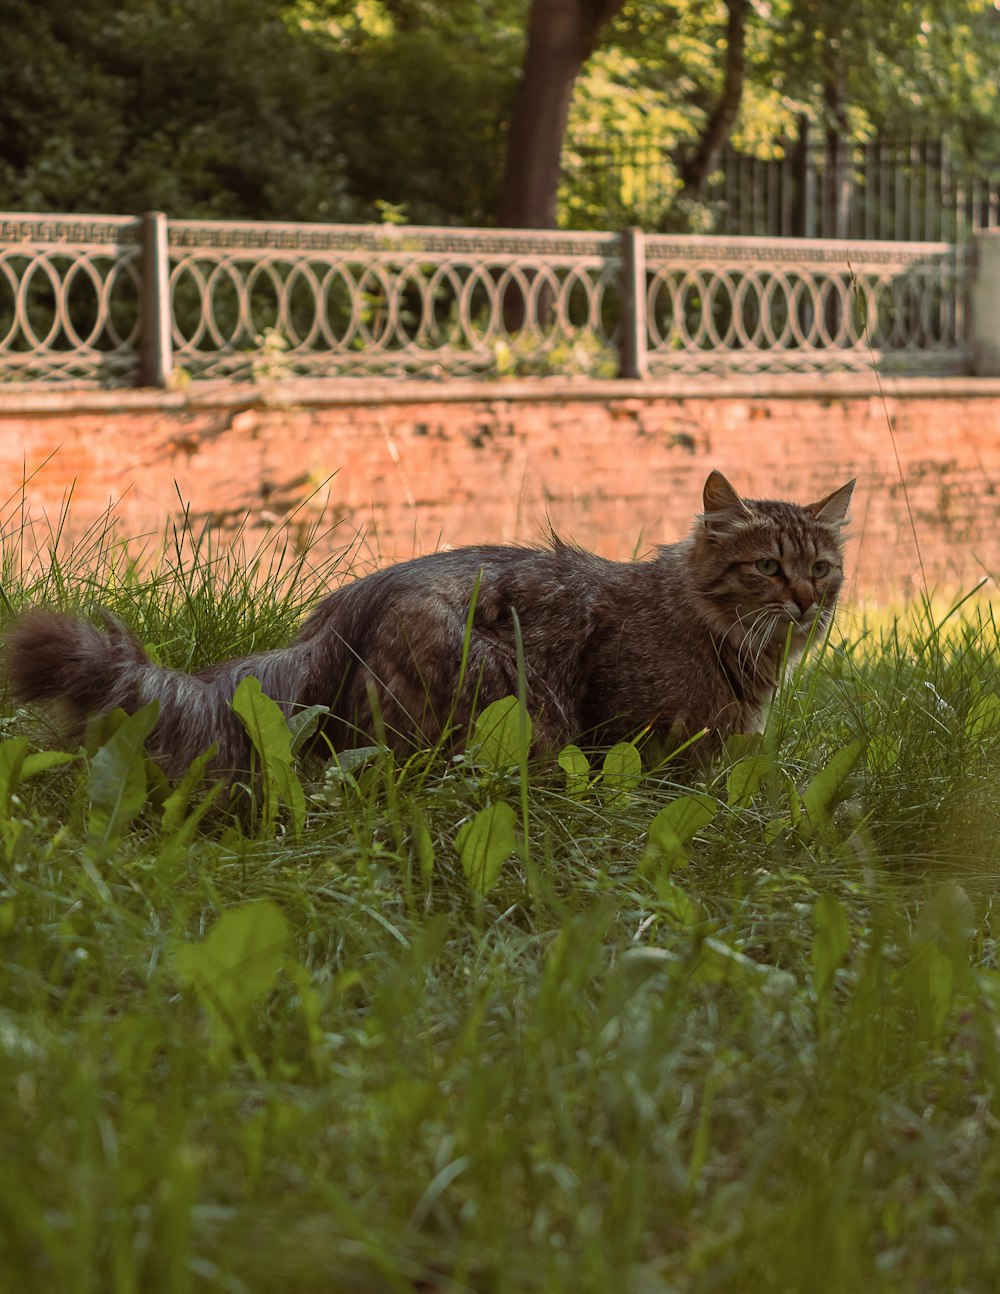 a cat sitting in the grass near a fence